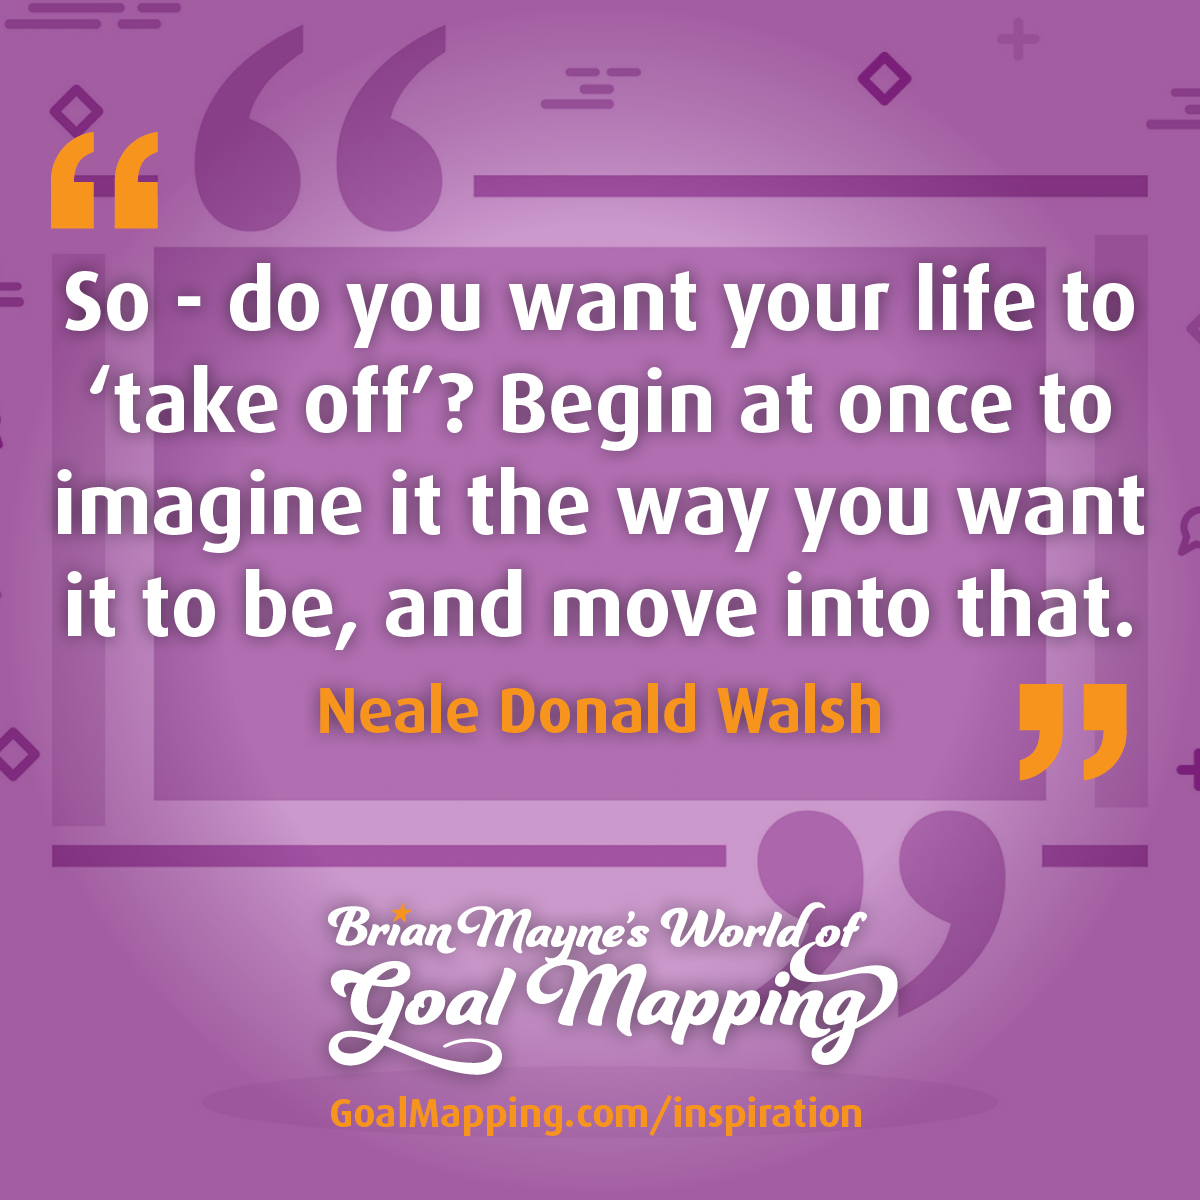 "So - do you want your life to “take off”? Begin at once to imagine it the way you want it to be - and move into that." Neale Donald Walsh